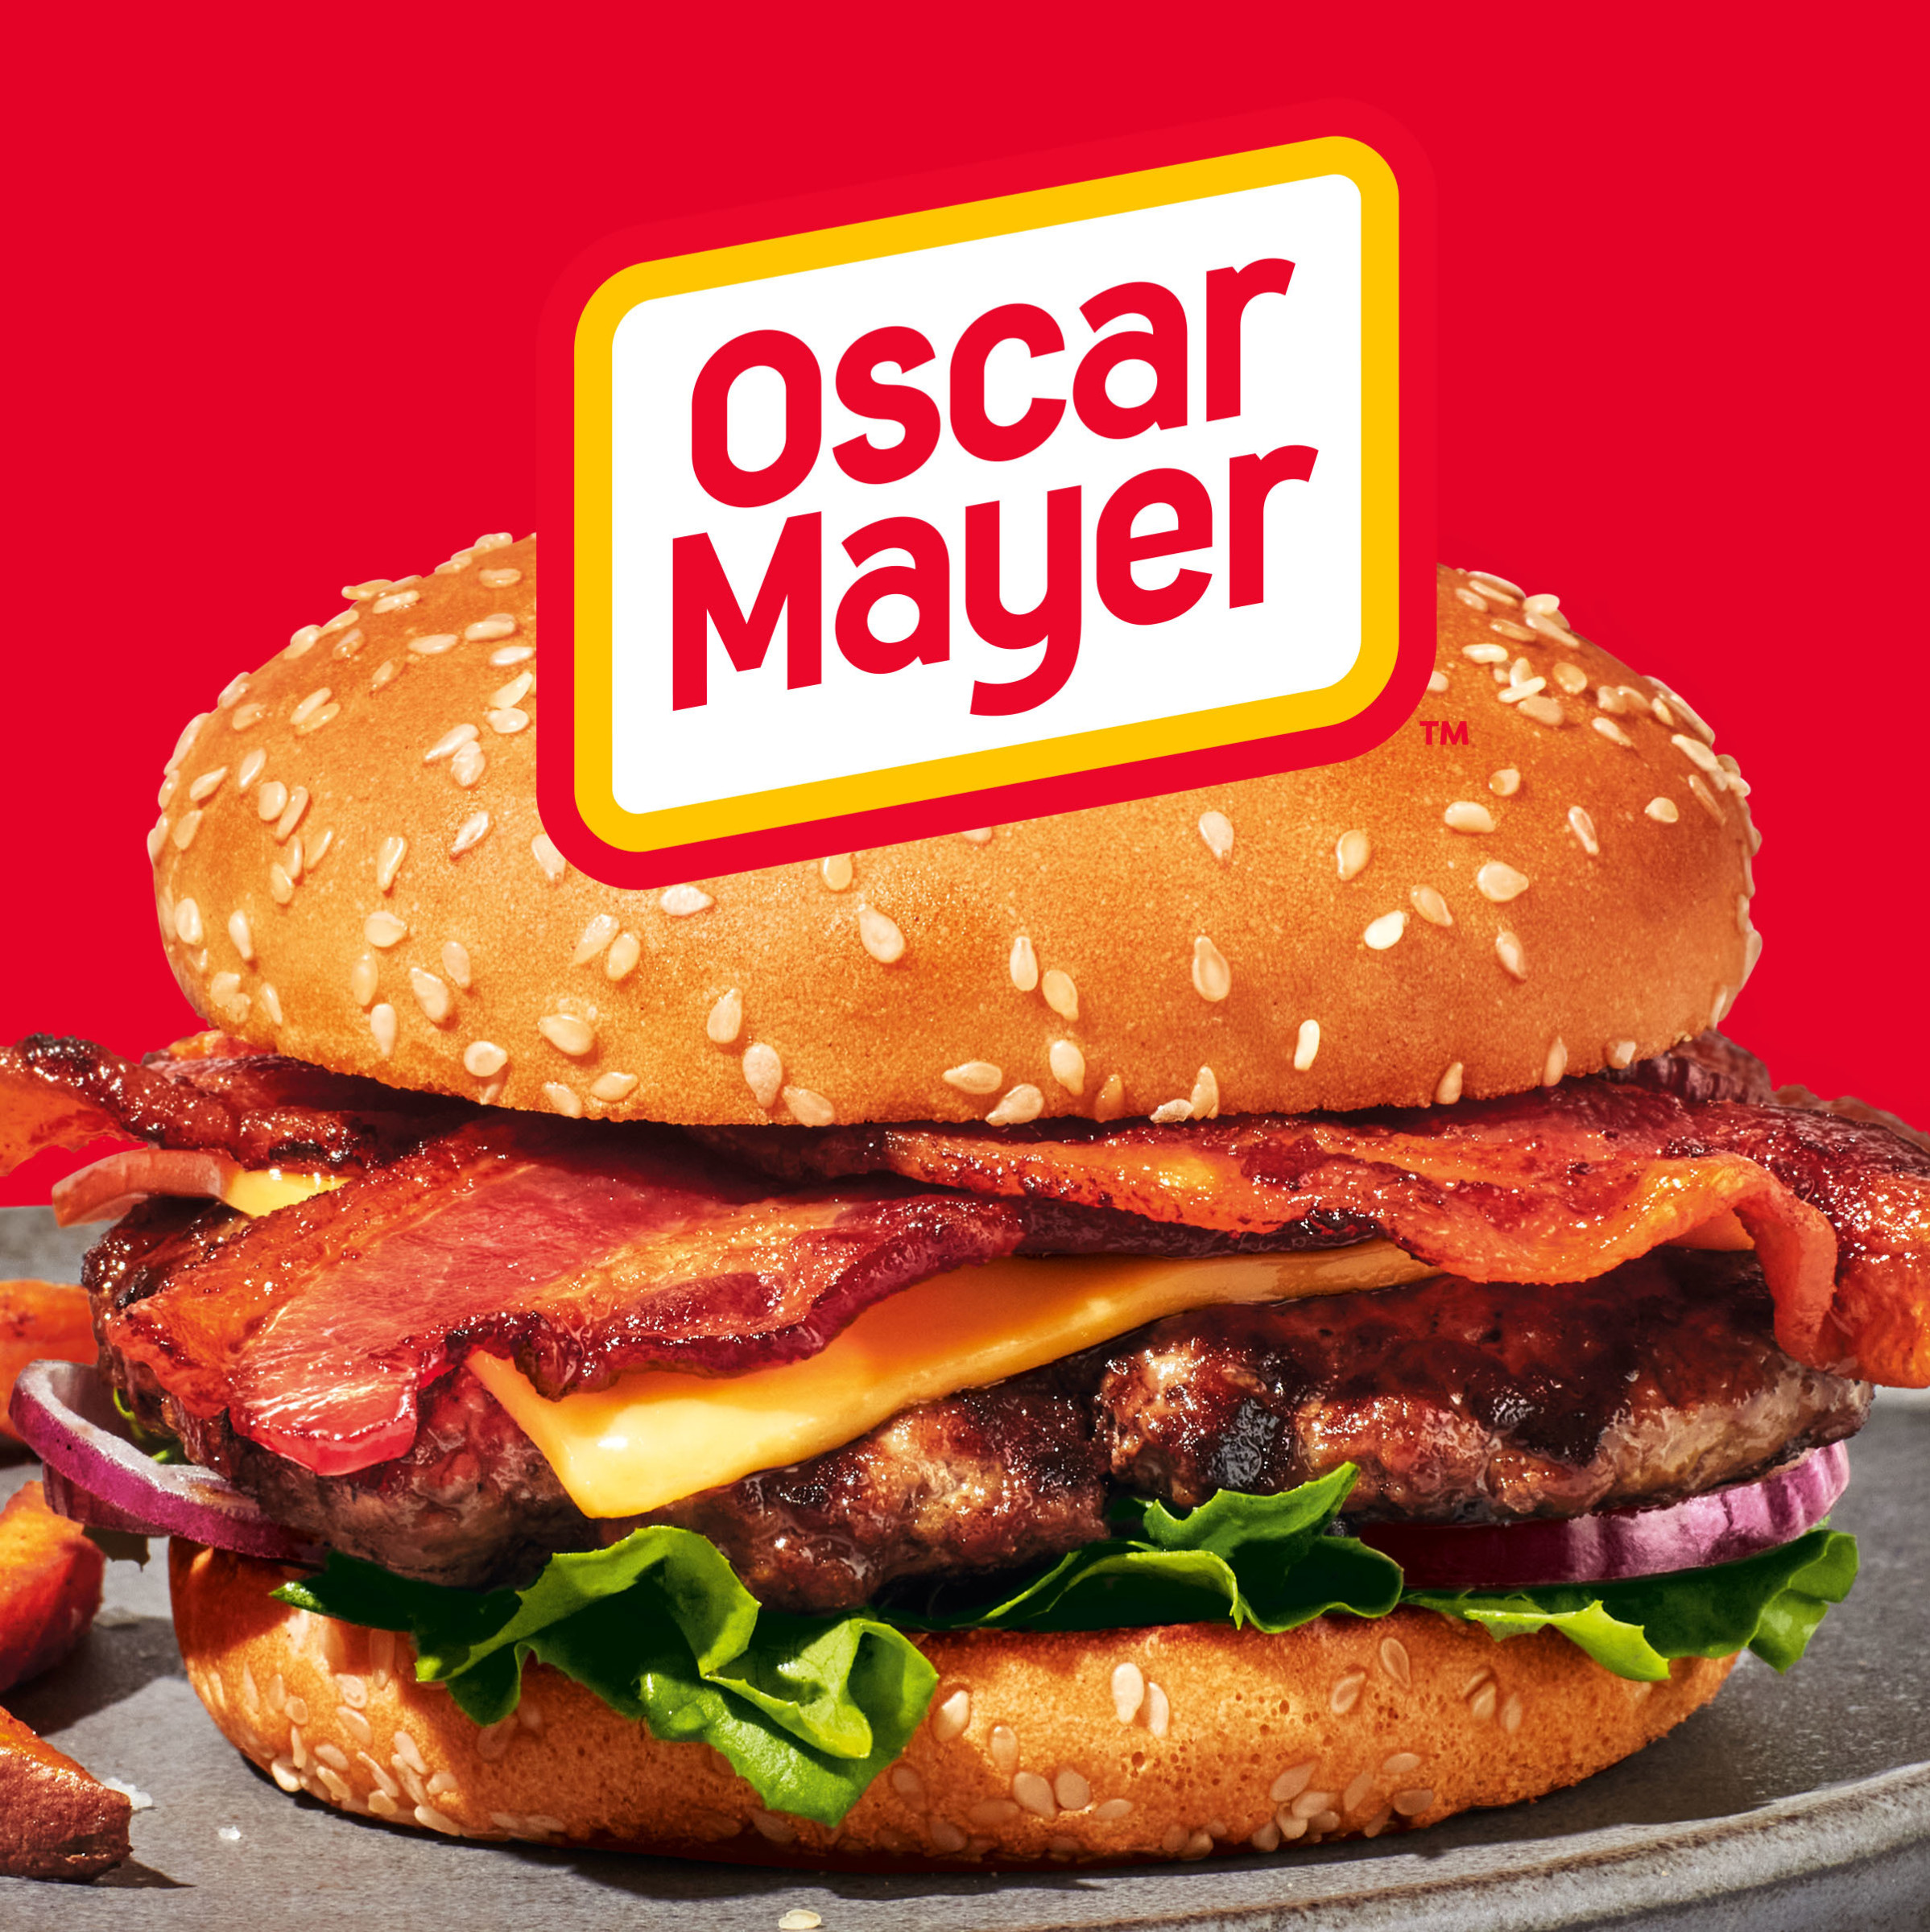 Oscar Mayer Fully Cooked & Gluten Free Turkey Bacon with 62% Less Fat & 57% Less Sodium, 3 ct Box, 12 oz Packs, 53-55 total slices - image 4 of 15